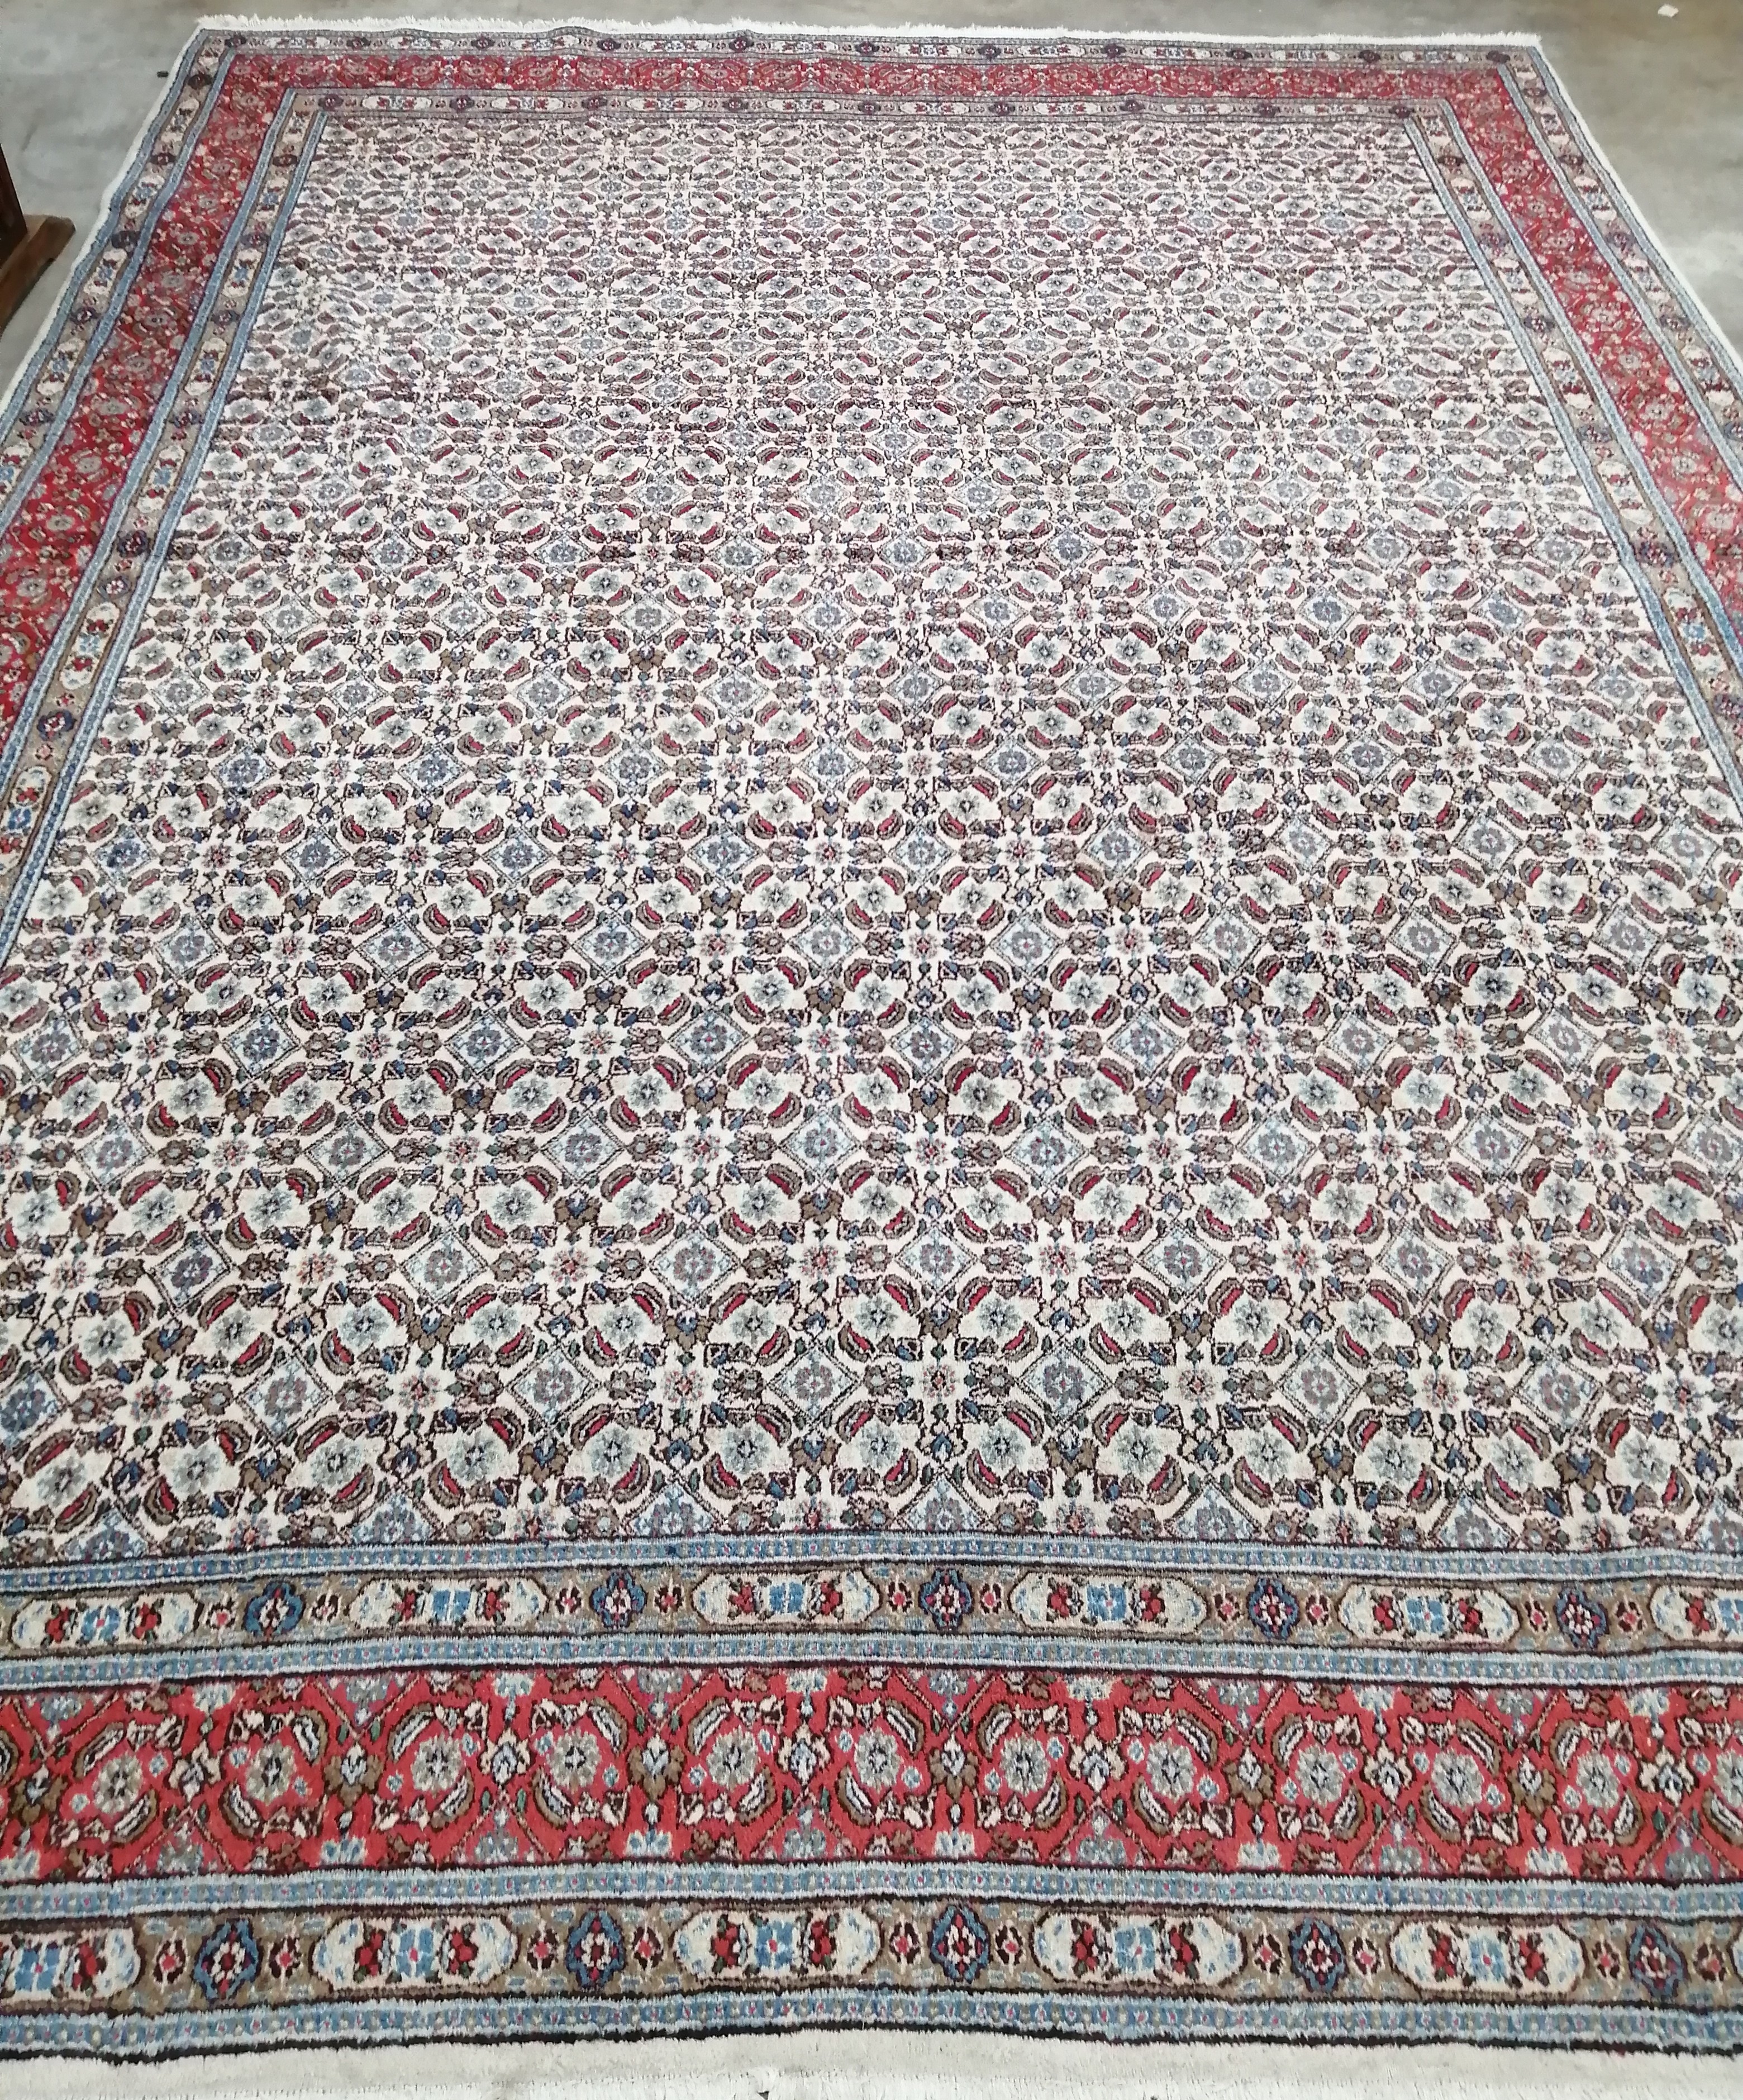 A North West Persian ivory ground carpet, 370 x 170cm